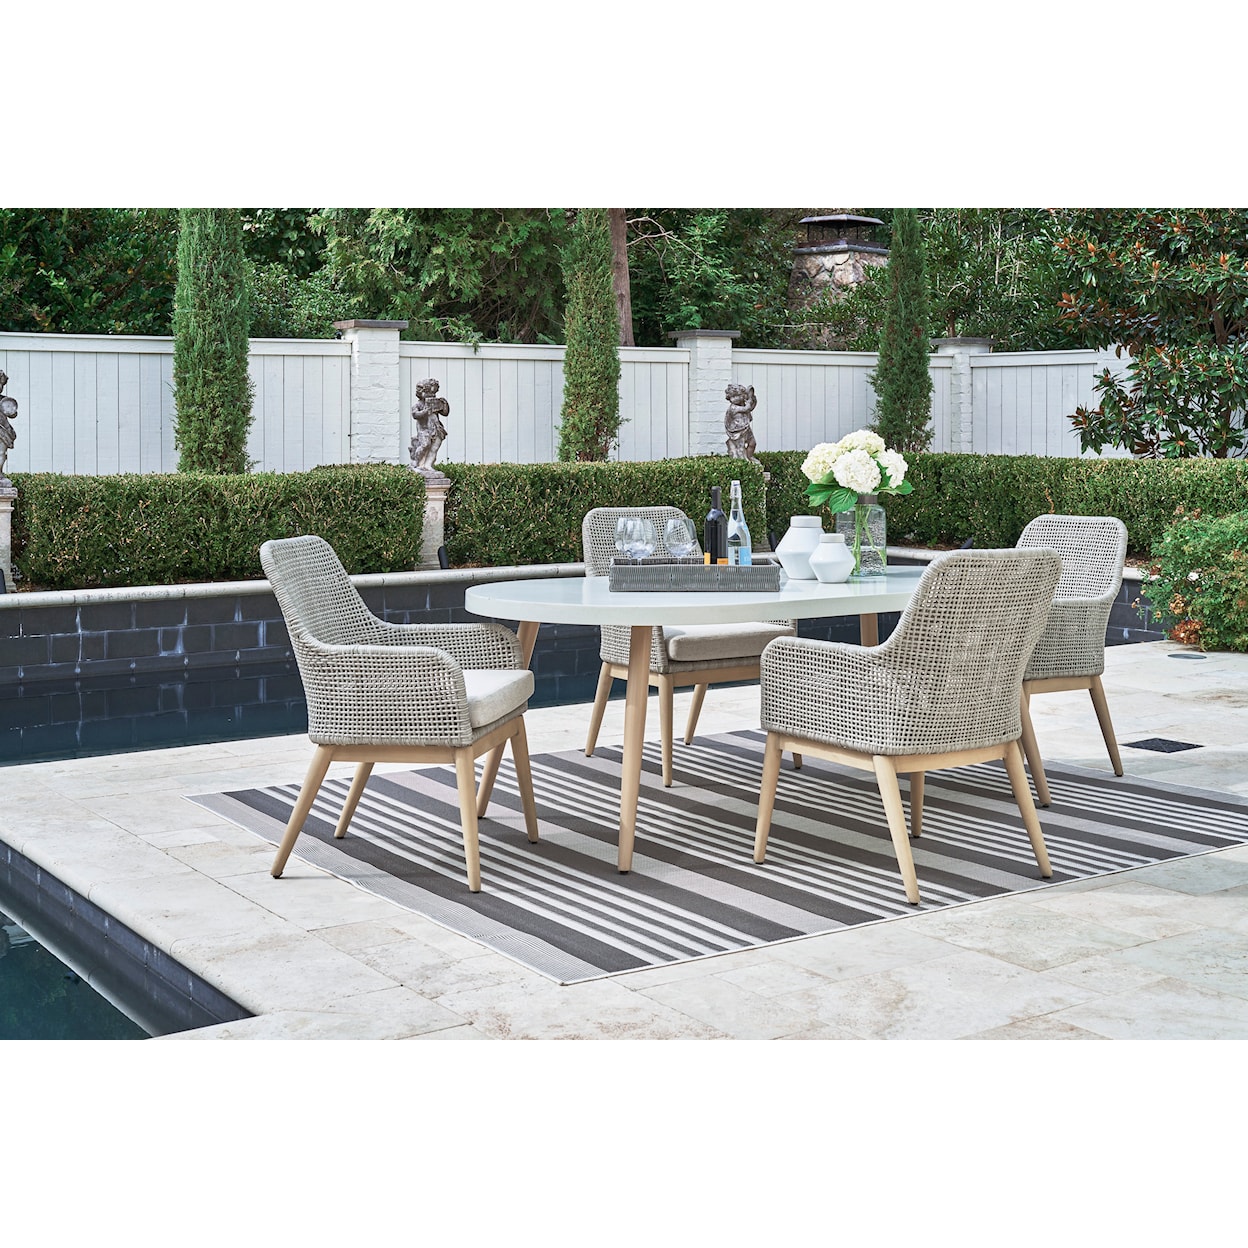 Signature Design by Ashley Seton Creek Outdoor Dining Arm Chair (Set of 2)